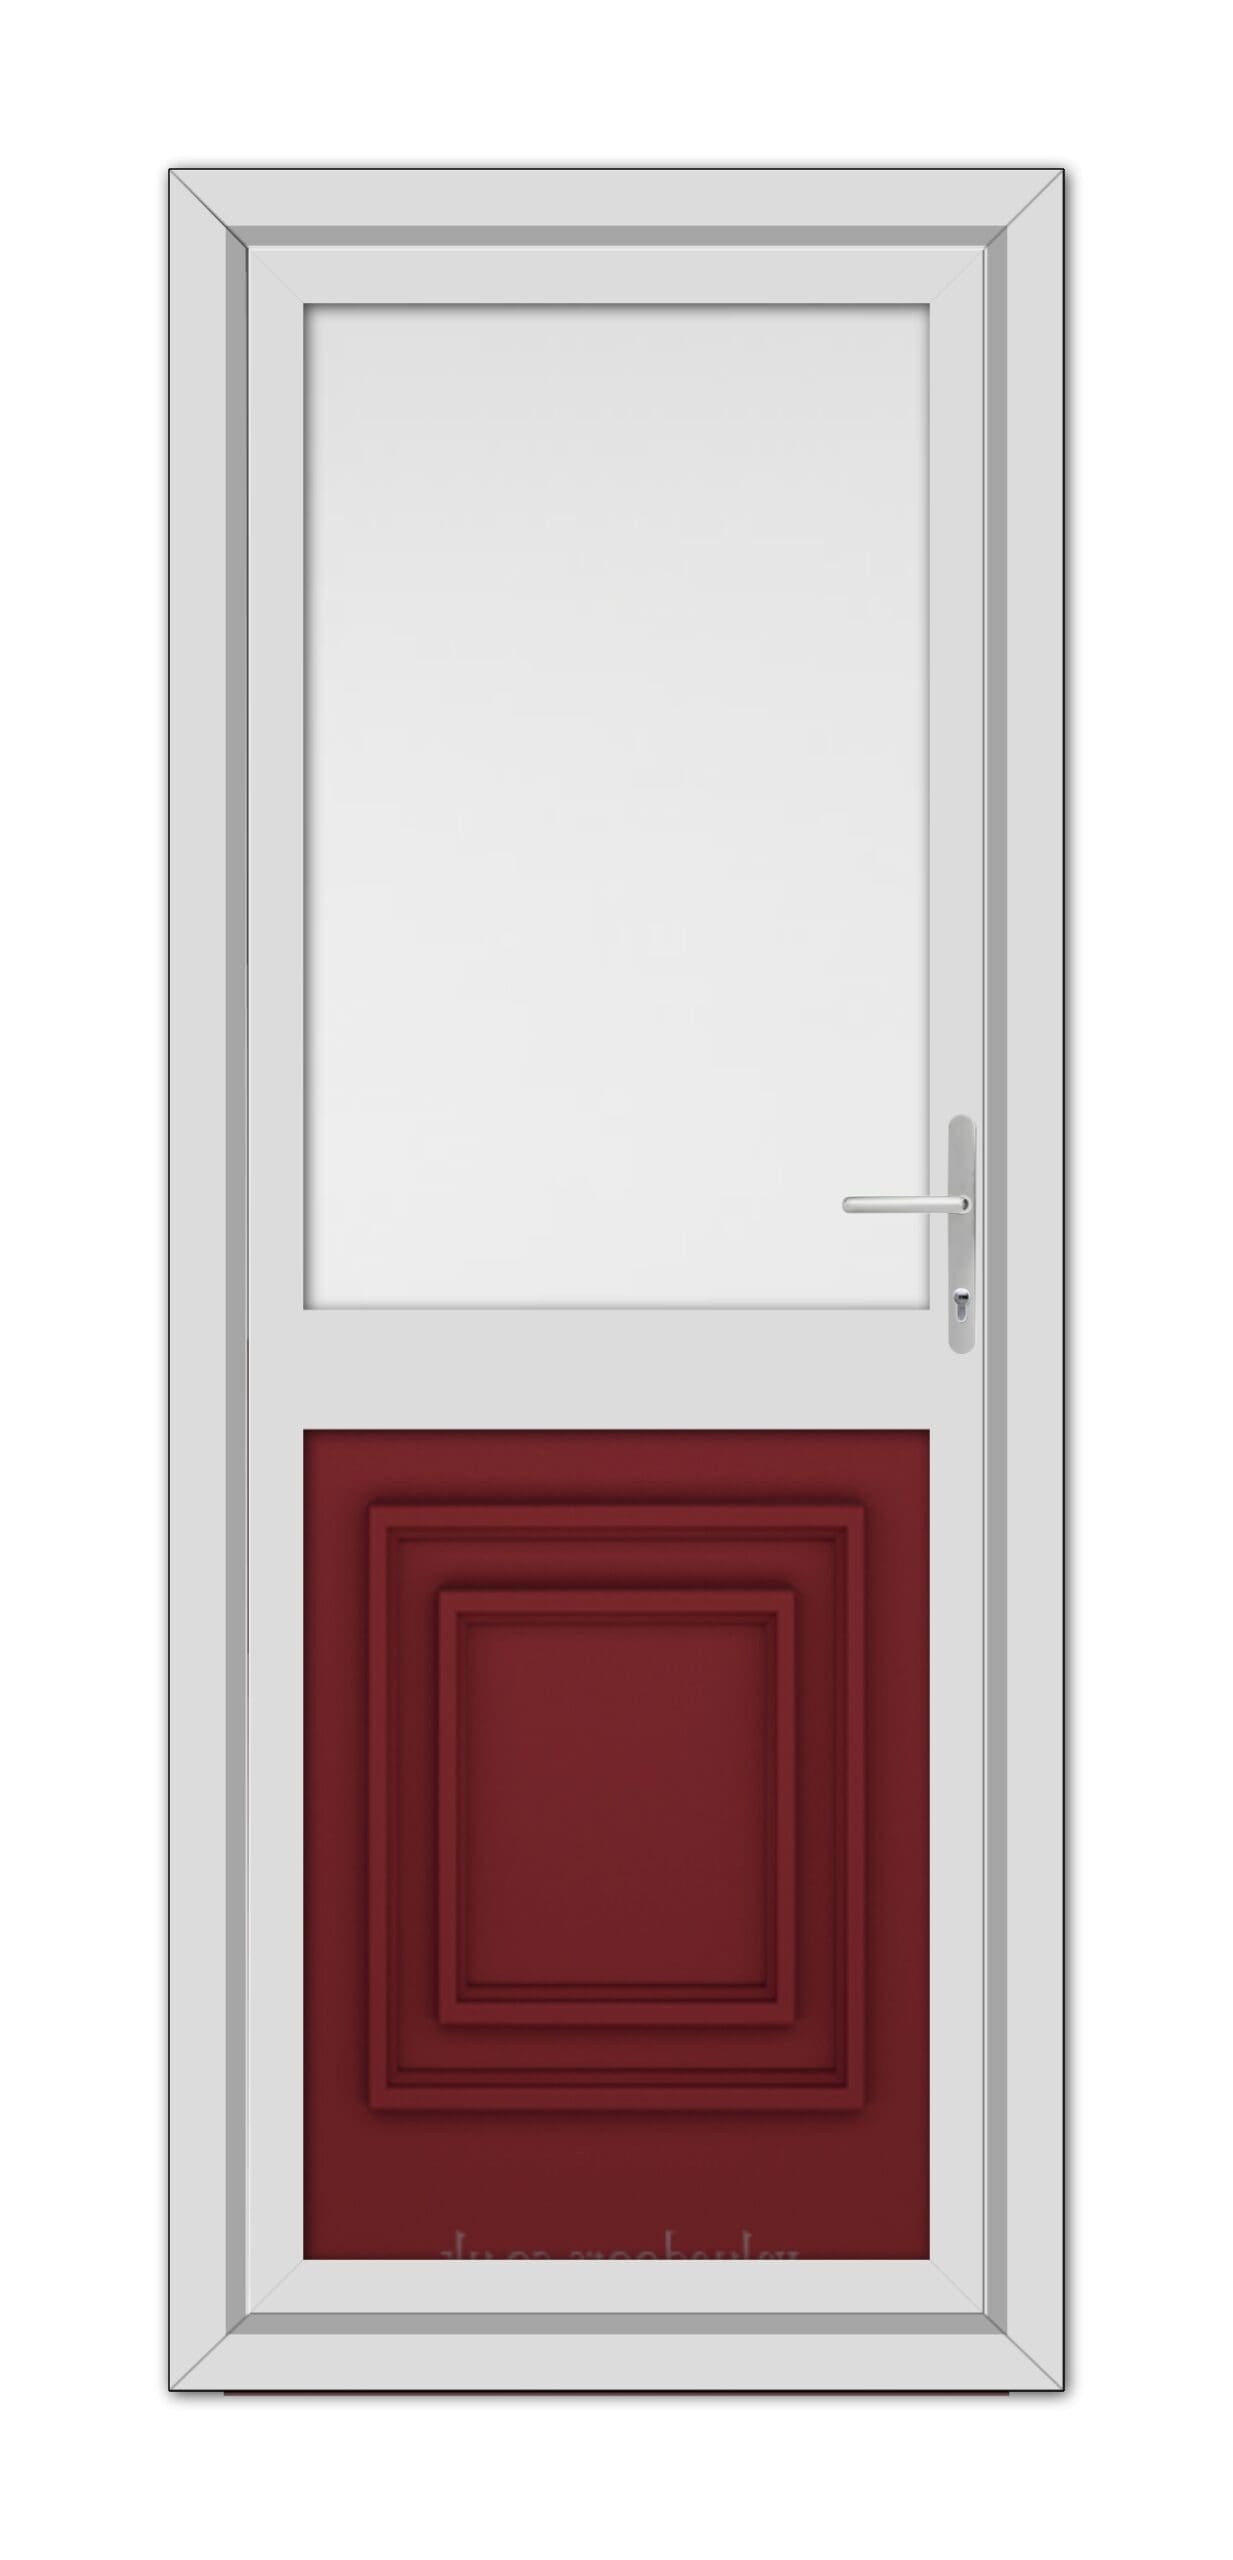 A modern Red Hannover Half uPVC Back Door with a white frame and a large red panel at the bottom, featuring a smaller window at the top and a metal handle on the right side.